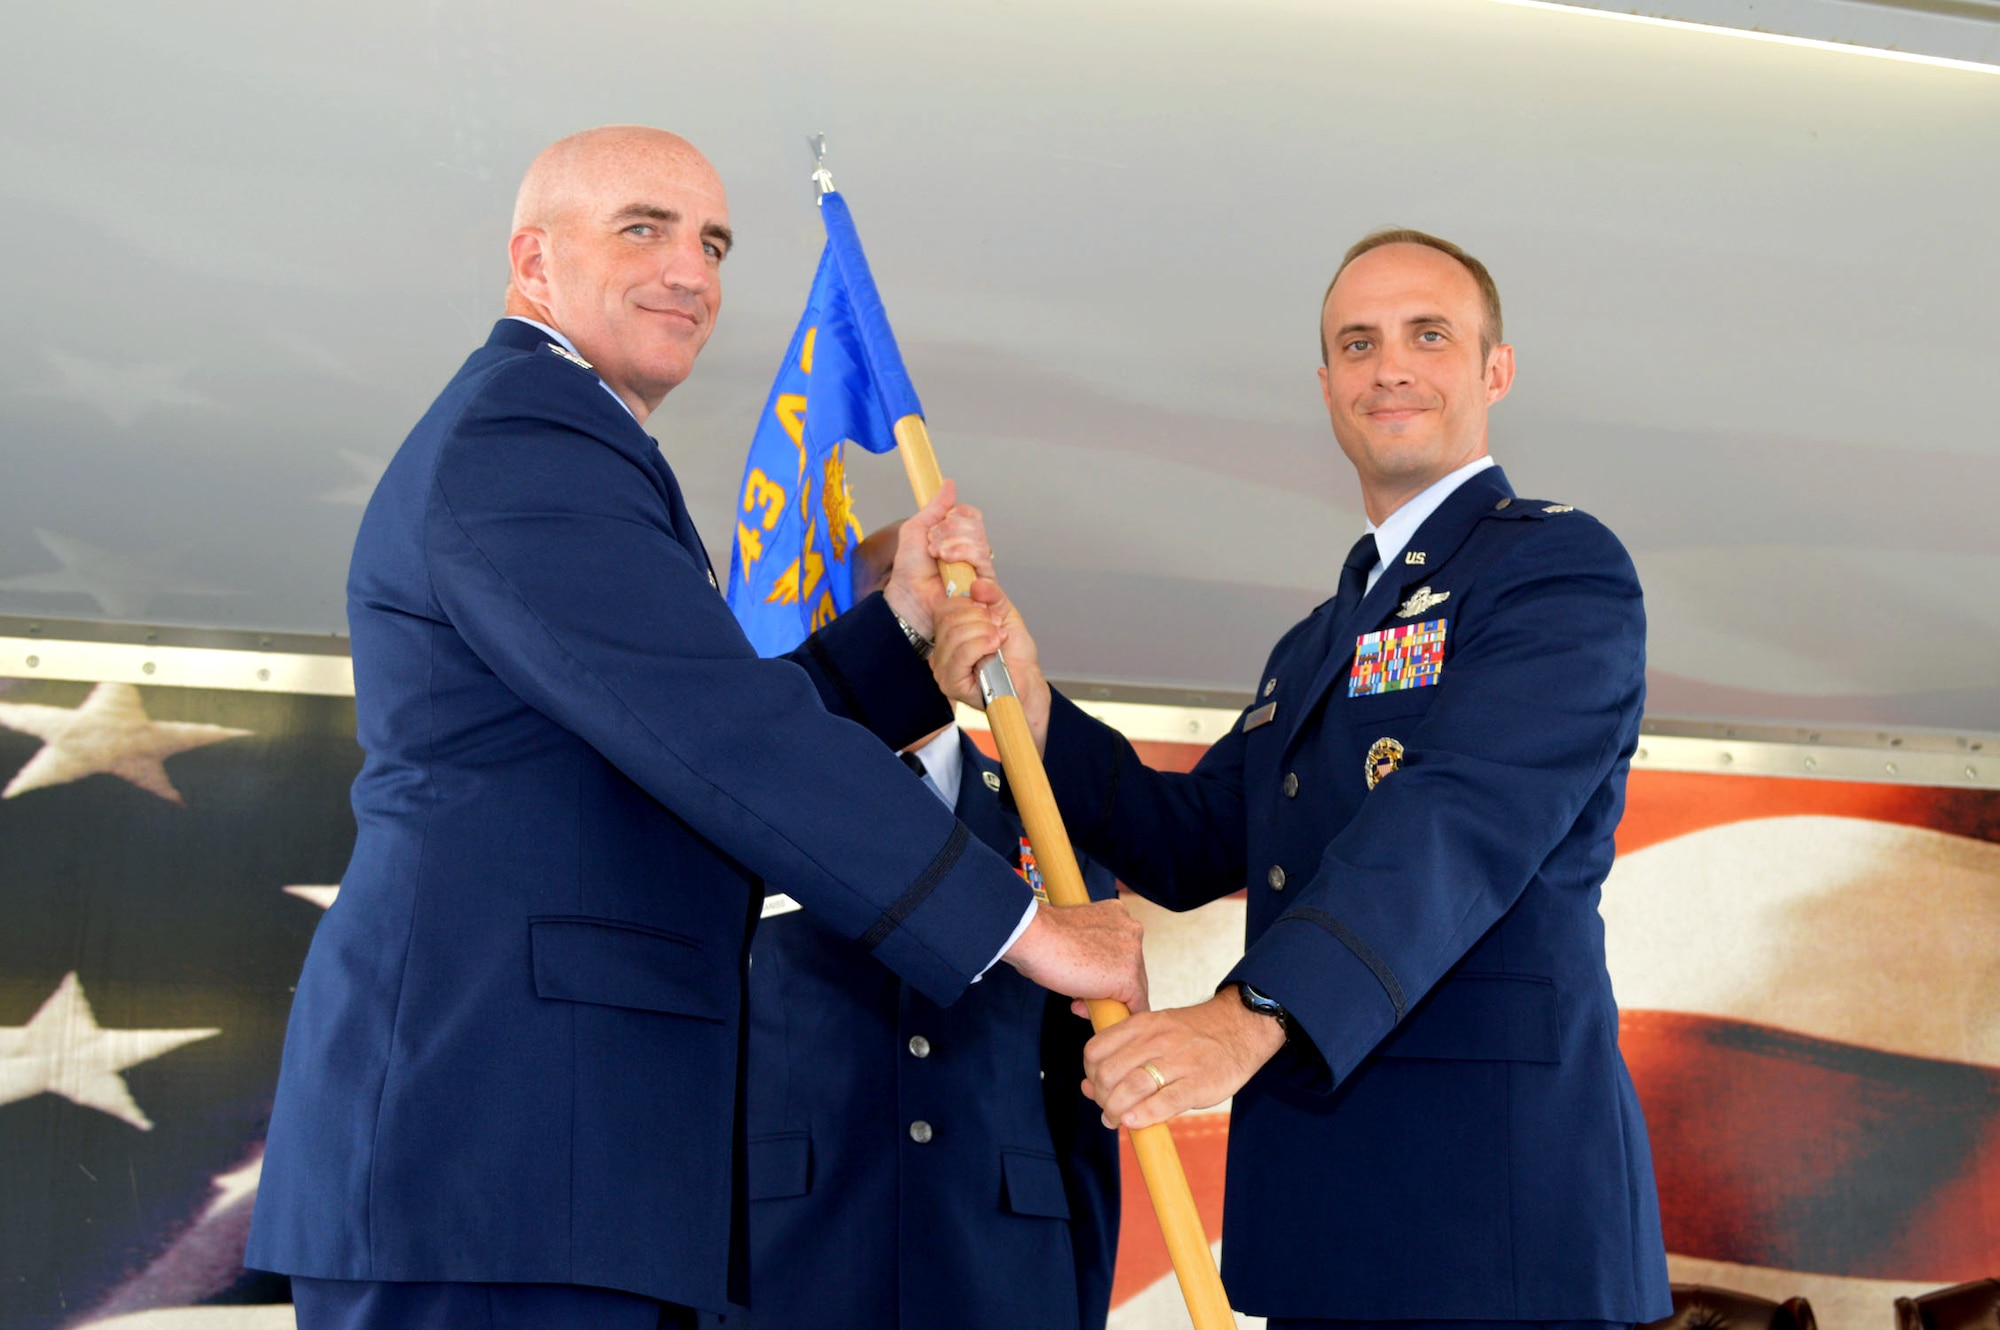 Col. Kenneth Moss, 43rd Airlift Group commander, left, passes the 43rd Air Mobility Squadron guidon to Lt. Col. David Morgan during the 43rd Air Mobility Squadron activation ceremony July 1, 2015, at Pope Army Airfield, North Carolina. Morgan assumed command of the newly established squadron composed of aircraft maintenance and aerial port Airmen and functions transferred from the inactivated 43rd Aircraft Maintenance Squadron and the 3rd Aerial Port Squadron. (U.S. Air Force photo/Marvin Krause)